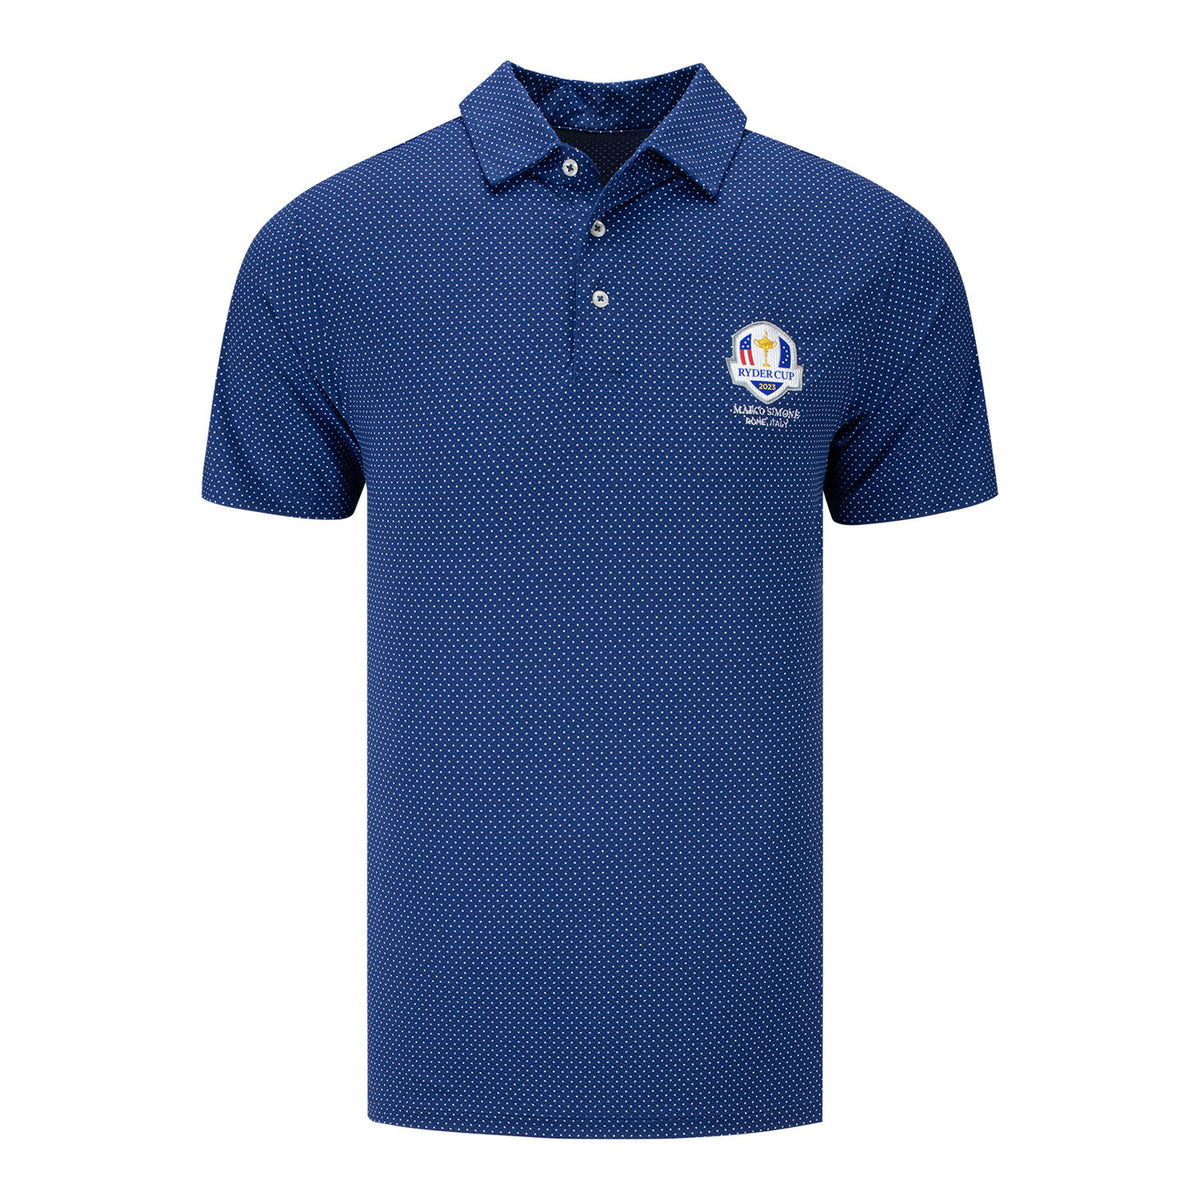 B. Draddy 2023 Ryder Cup The Captain Cool Polo in Blue- Front View